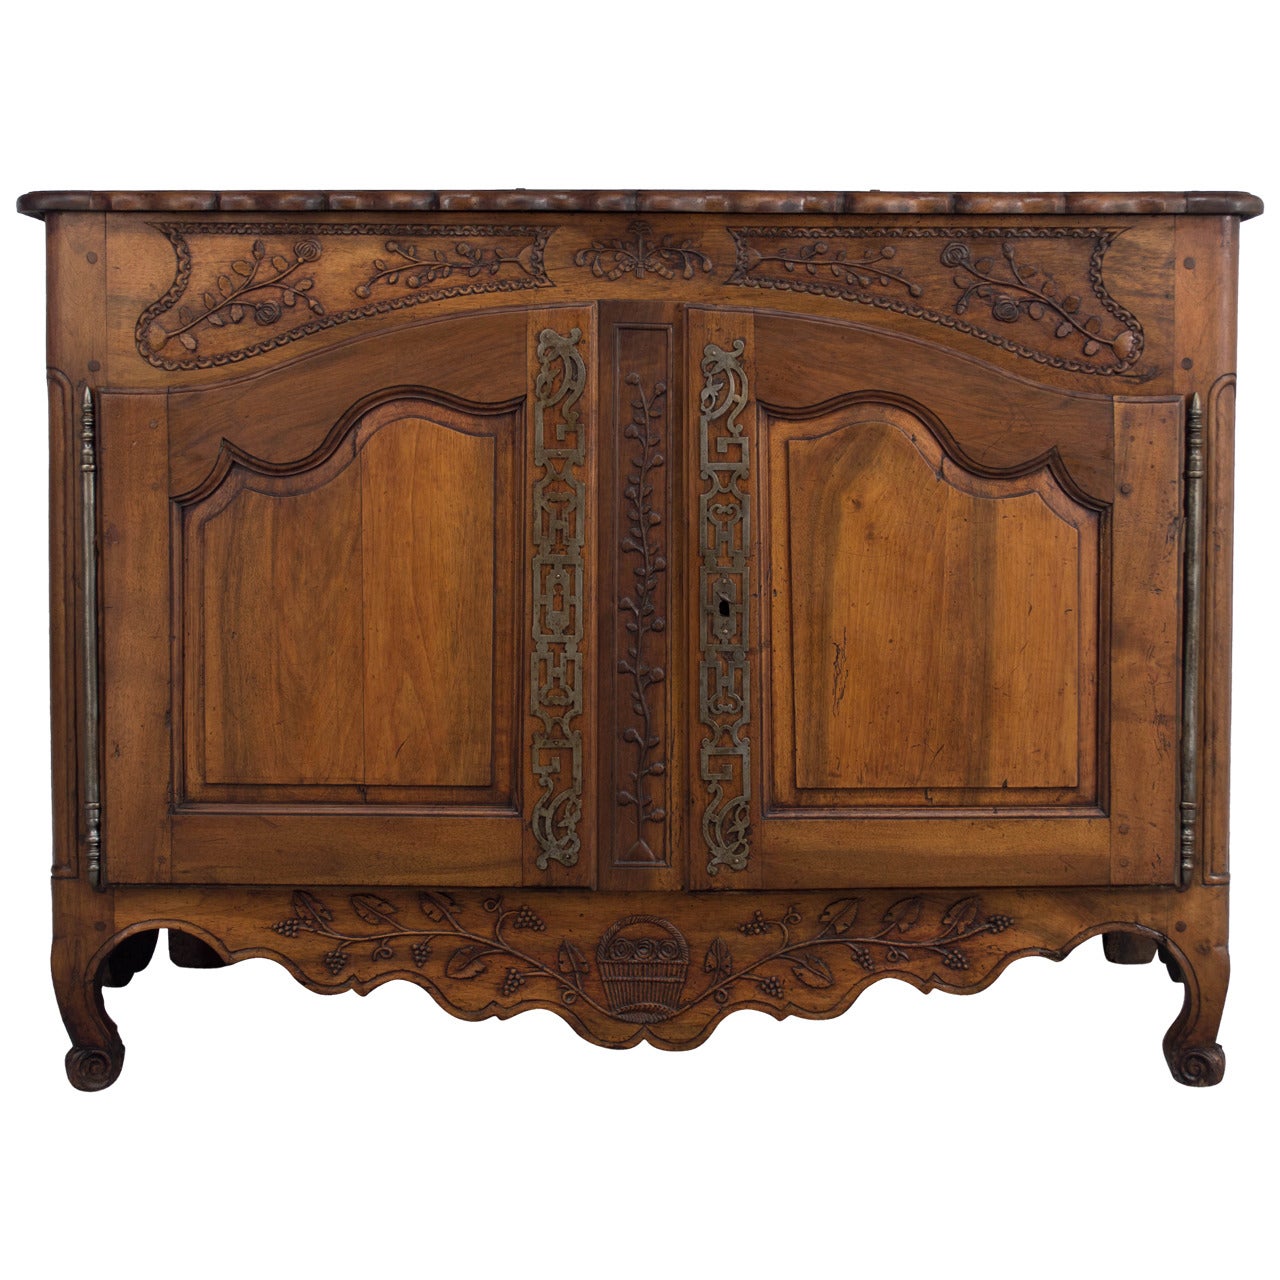 18th Century French Louis XV Buffet Provençal or Sideboard